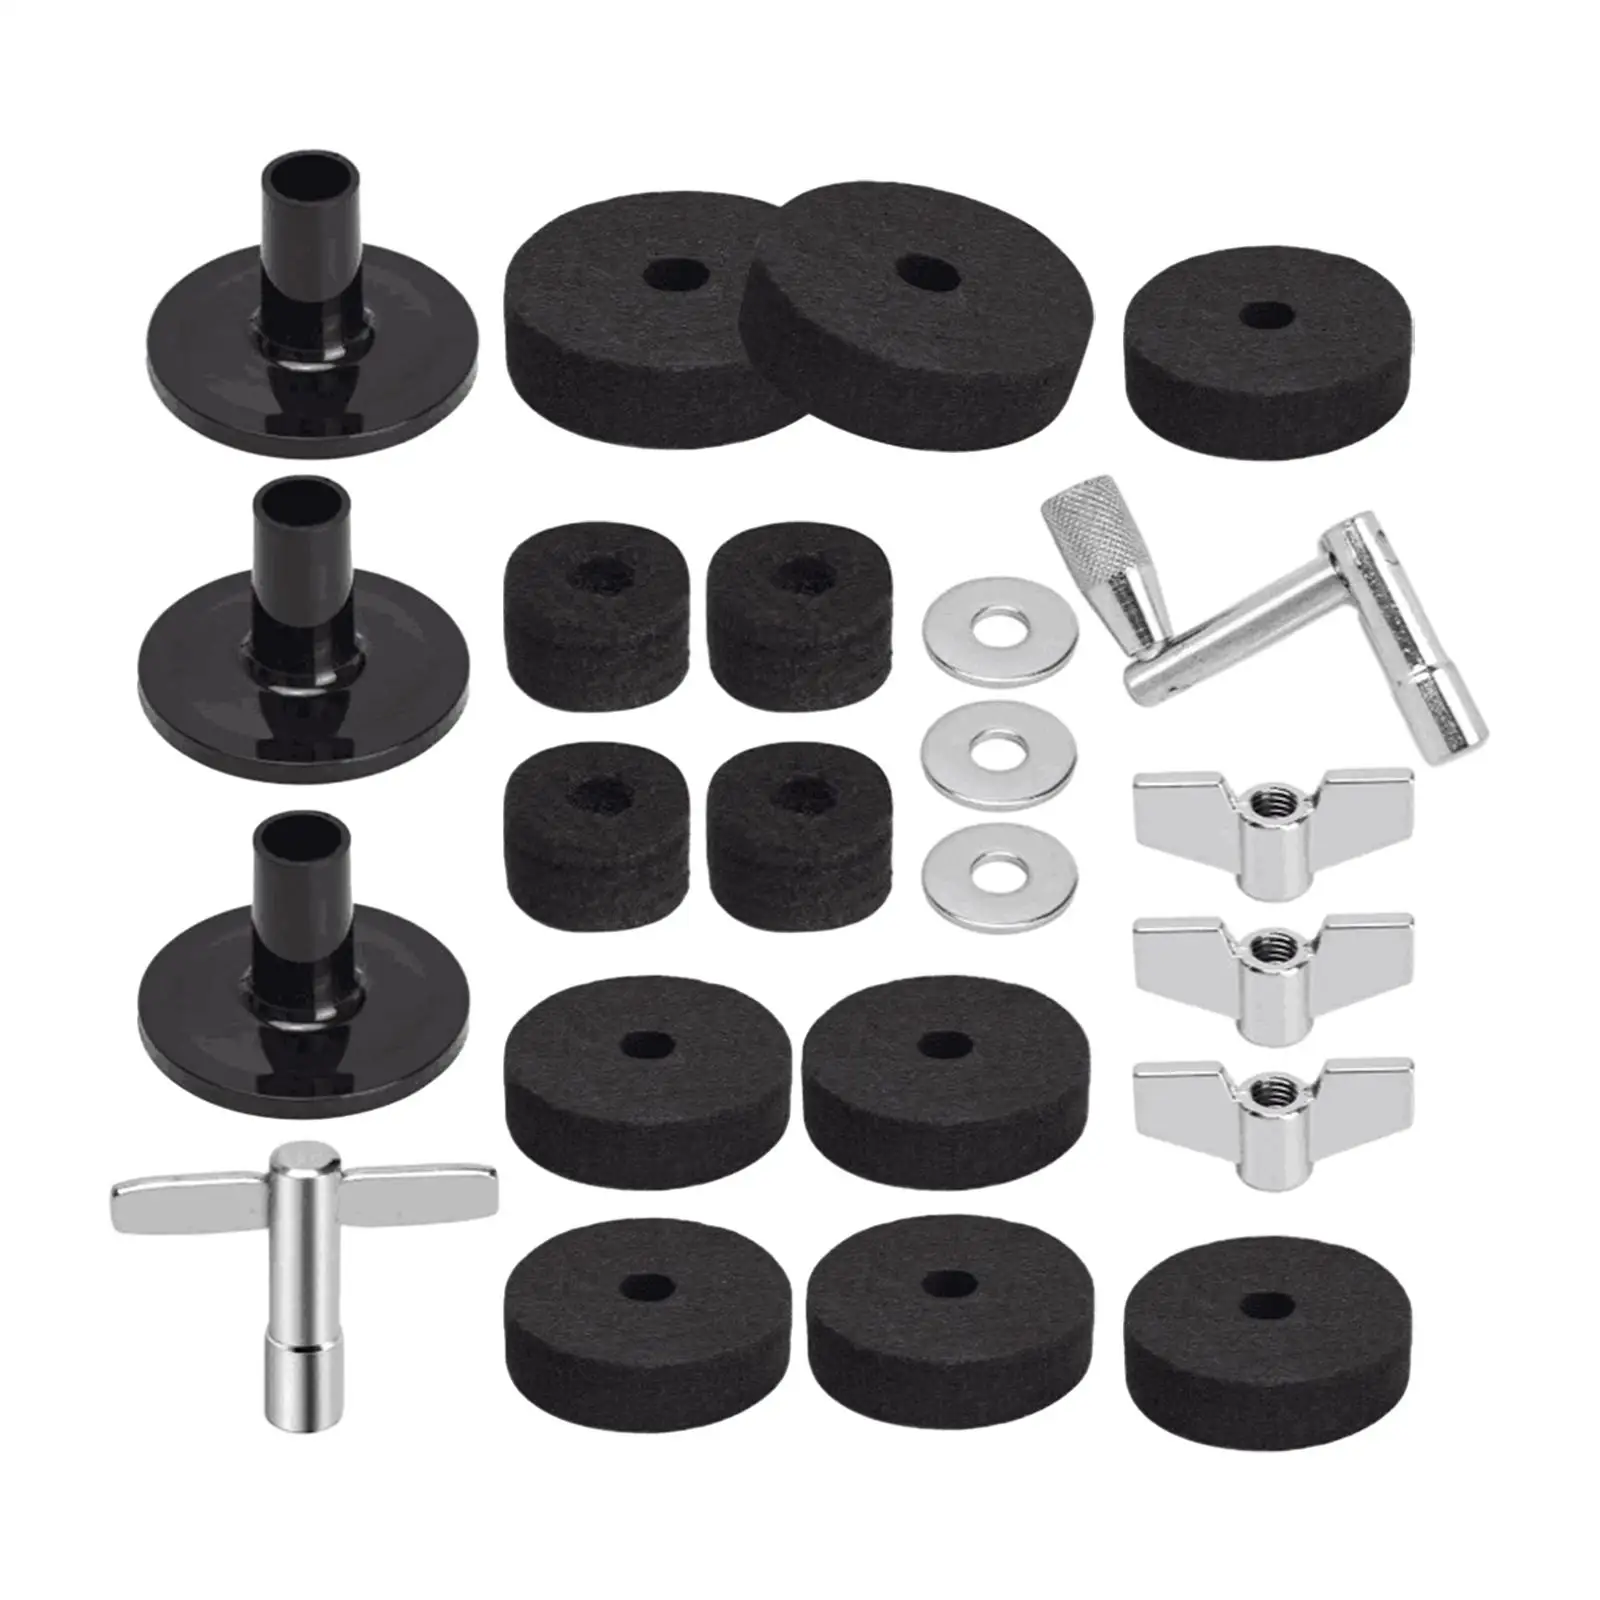 23 Pieces Cymbal Replacement Lightweight Percussion Instrument Parts for Drum